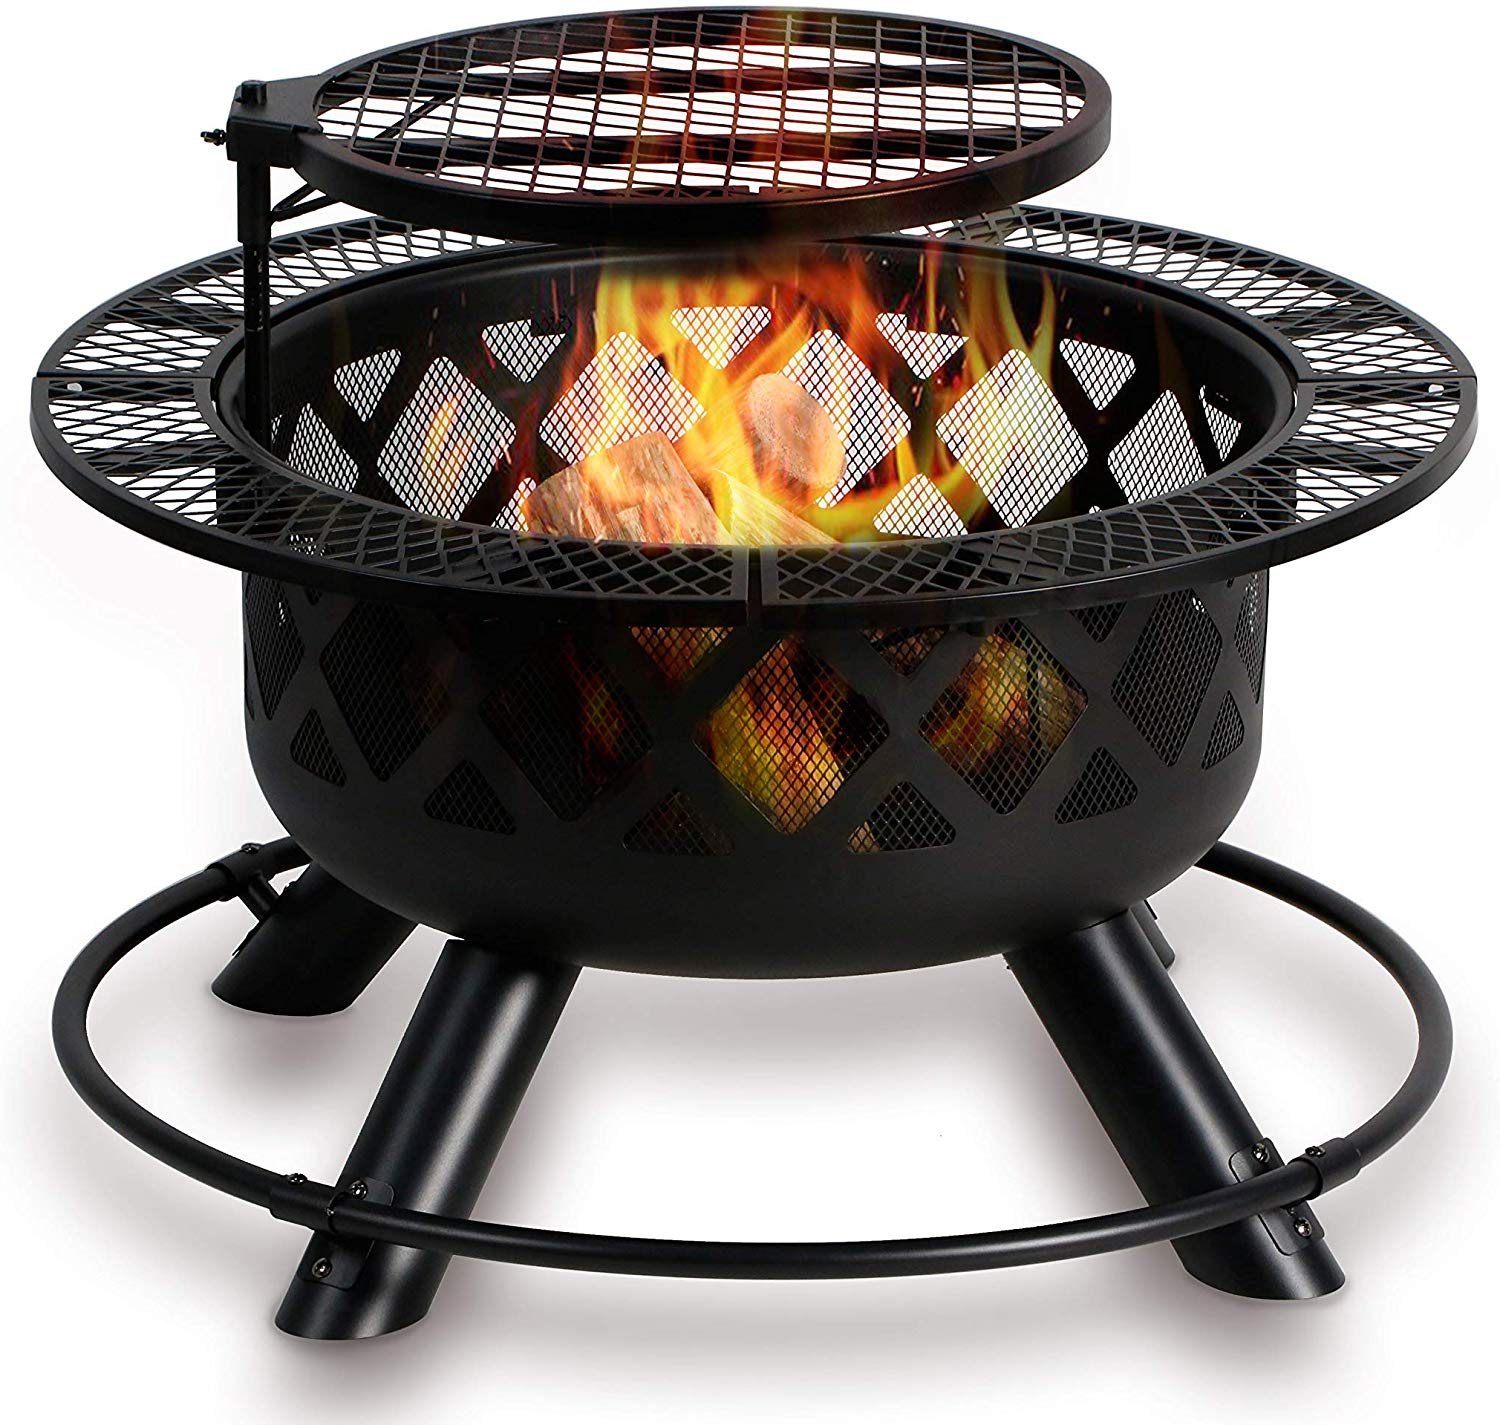 5 Best Fire Pit Grills Dec 2021, Square Fire Pit With Bbq Grill